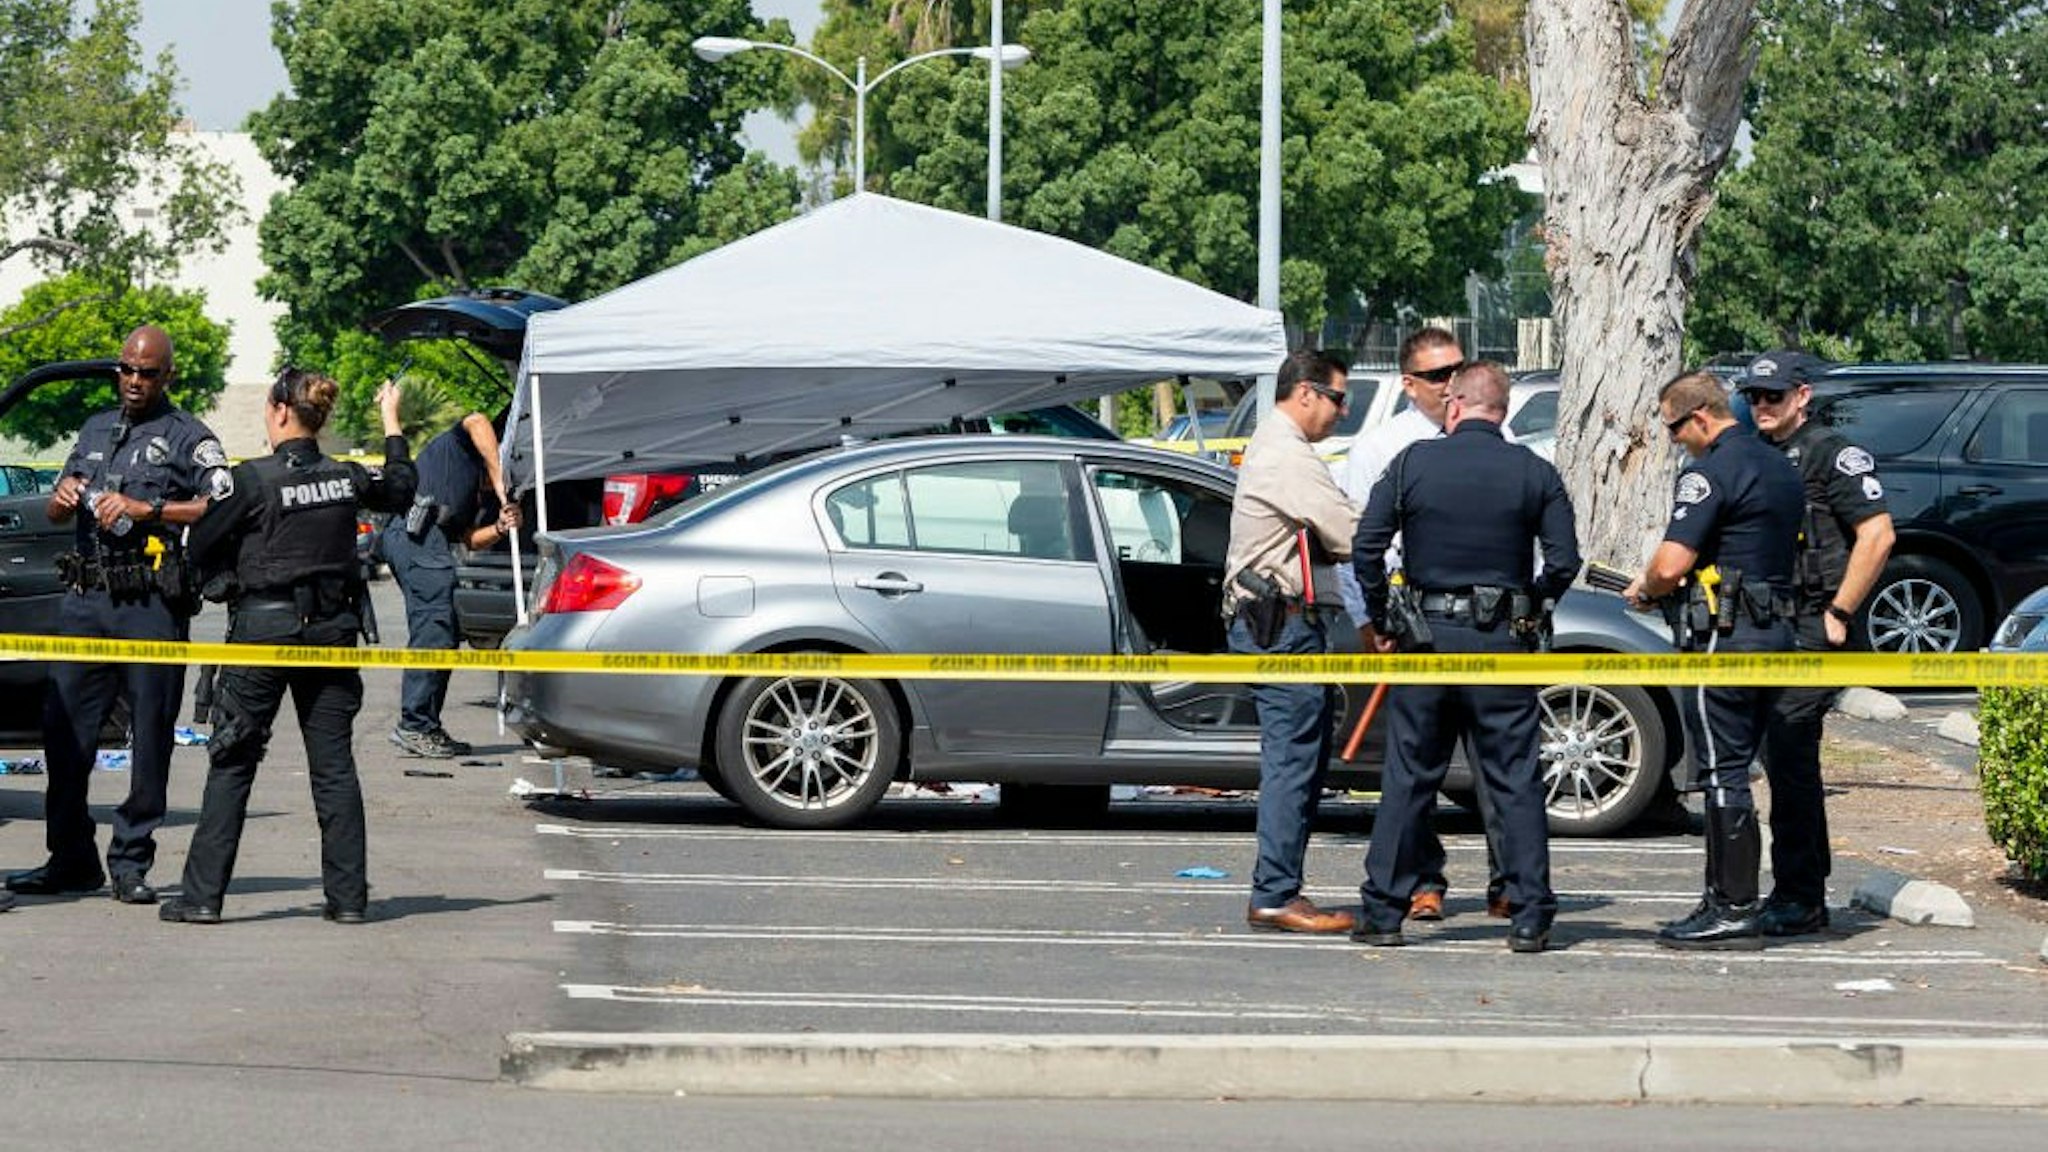 Police investigate a car where a retired Cal State Fullerton administrator was stabbed to death Monday, August 19, 2019 in Fullerton, CA.